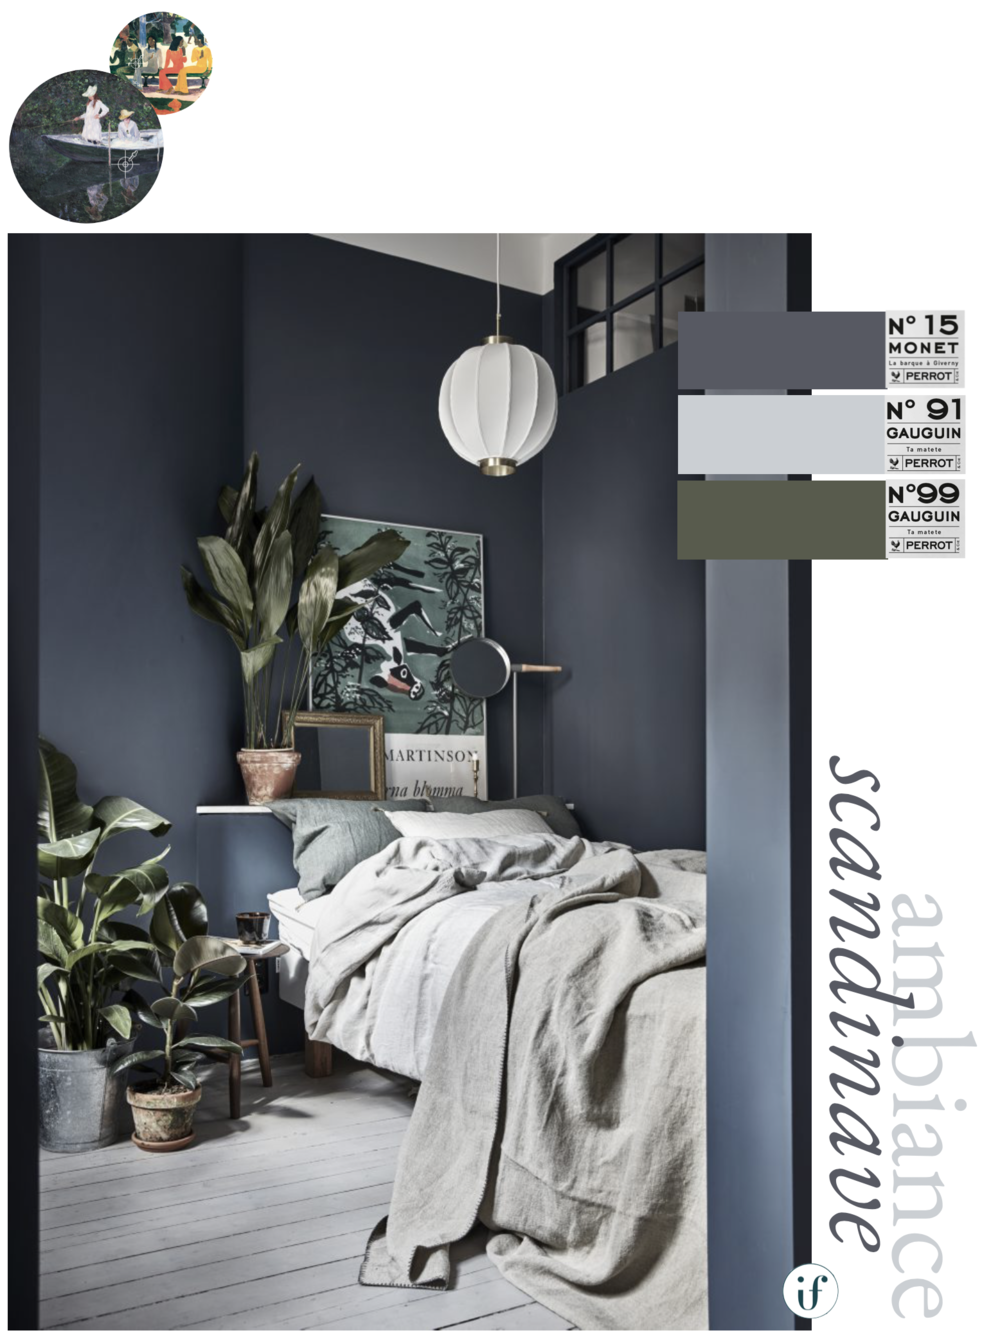 ilaria fatone x perrot - paint brand inspired by impressionistes- blue bedroom